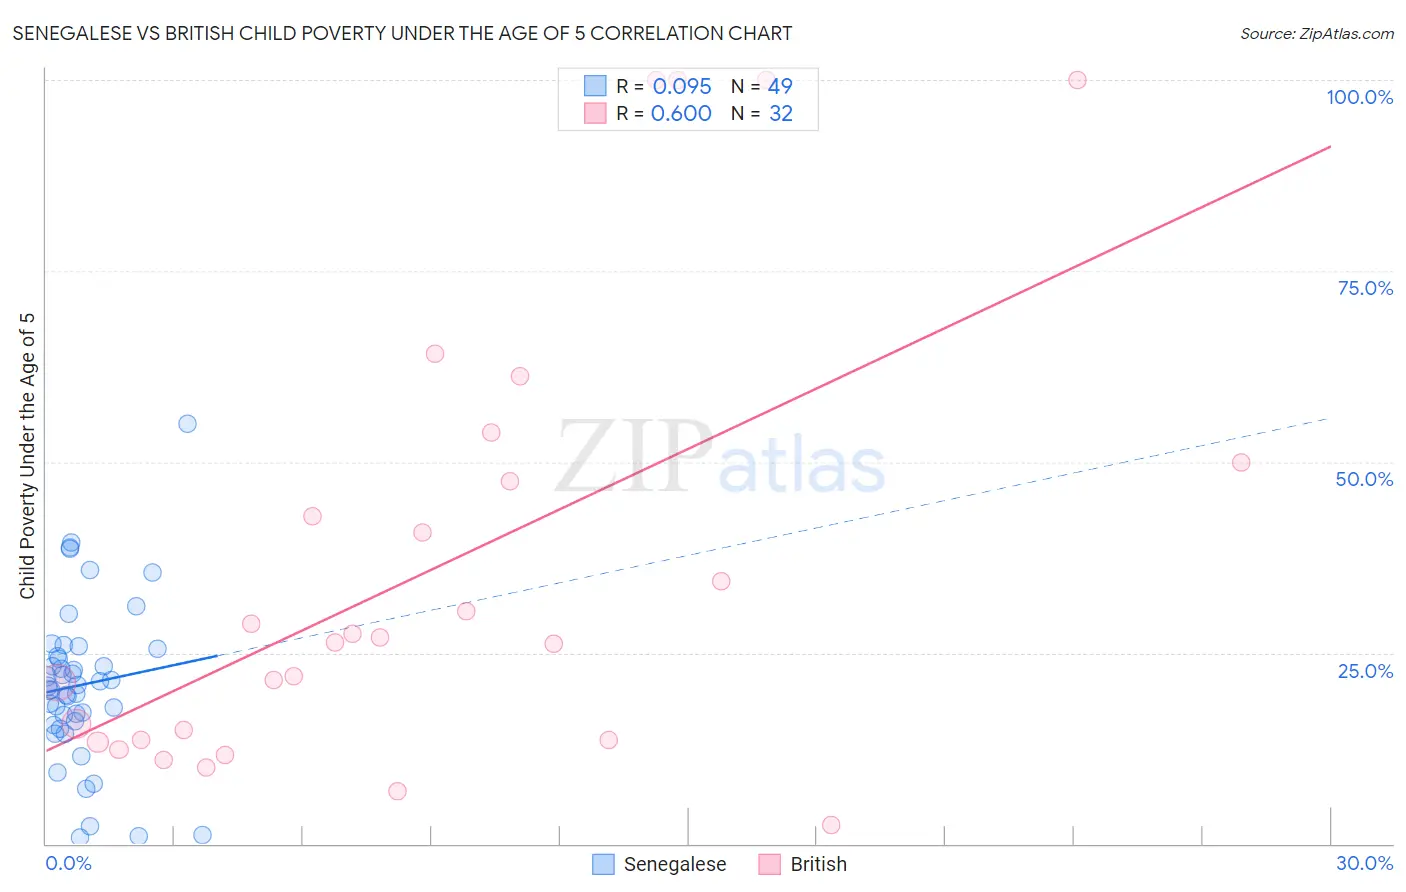 Senegalese vs British Child Poverty Under the Age of 5